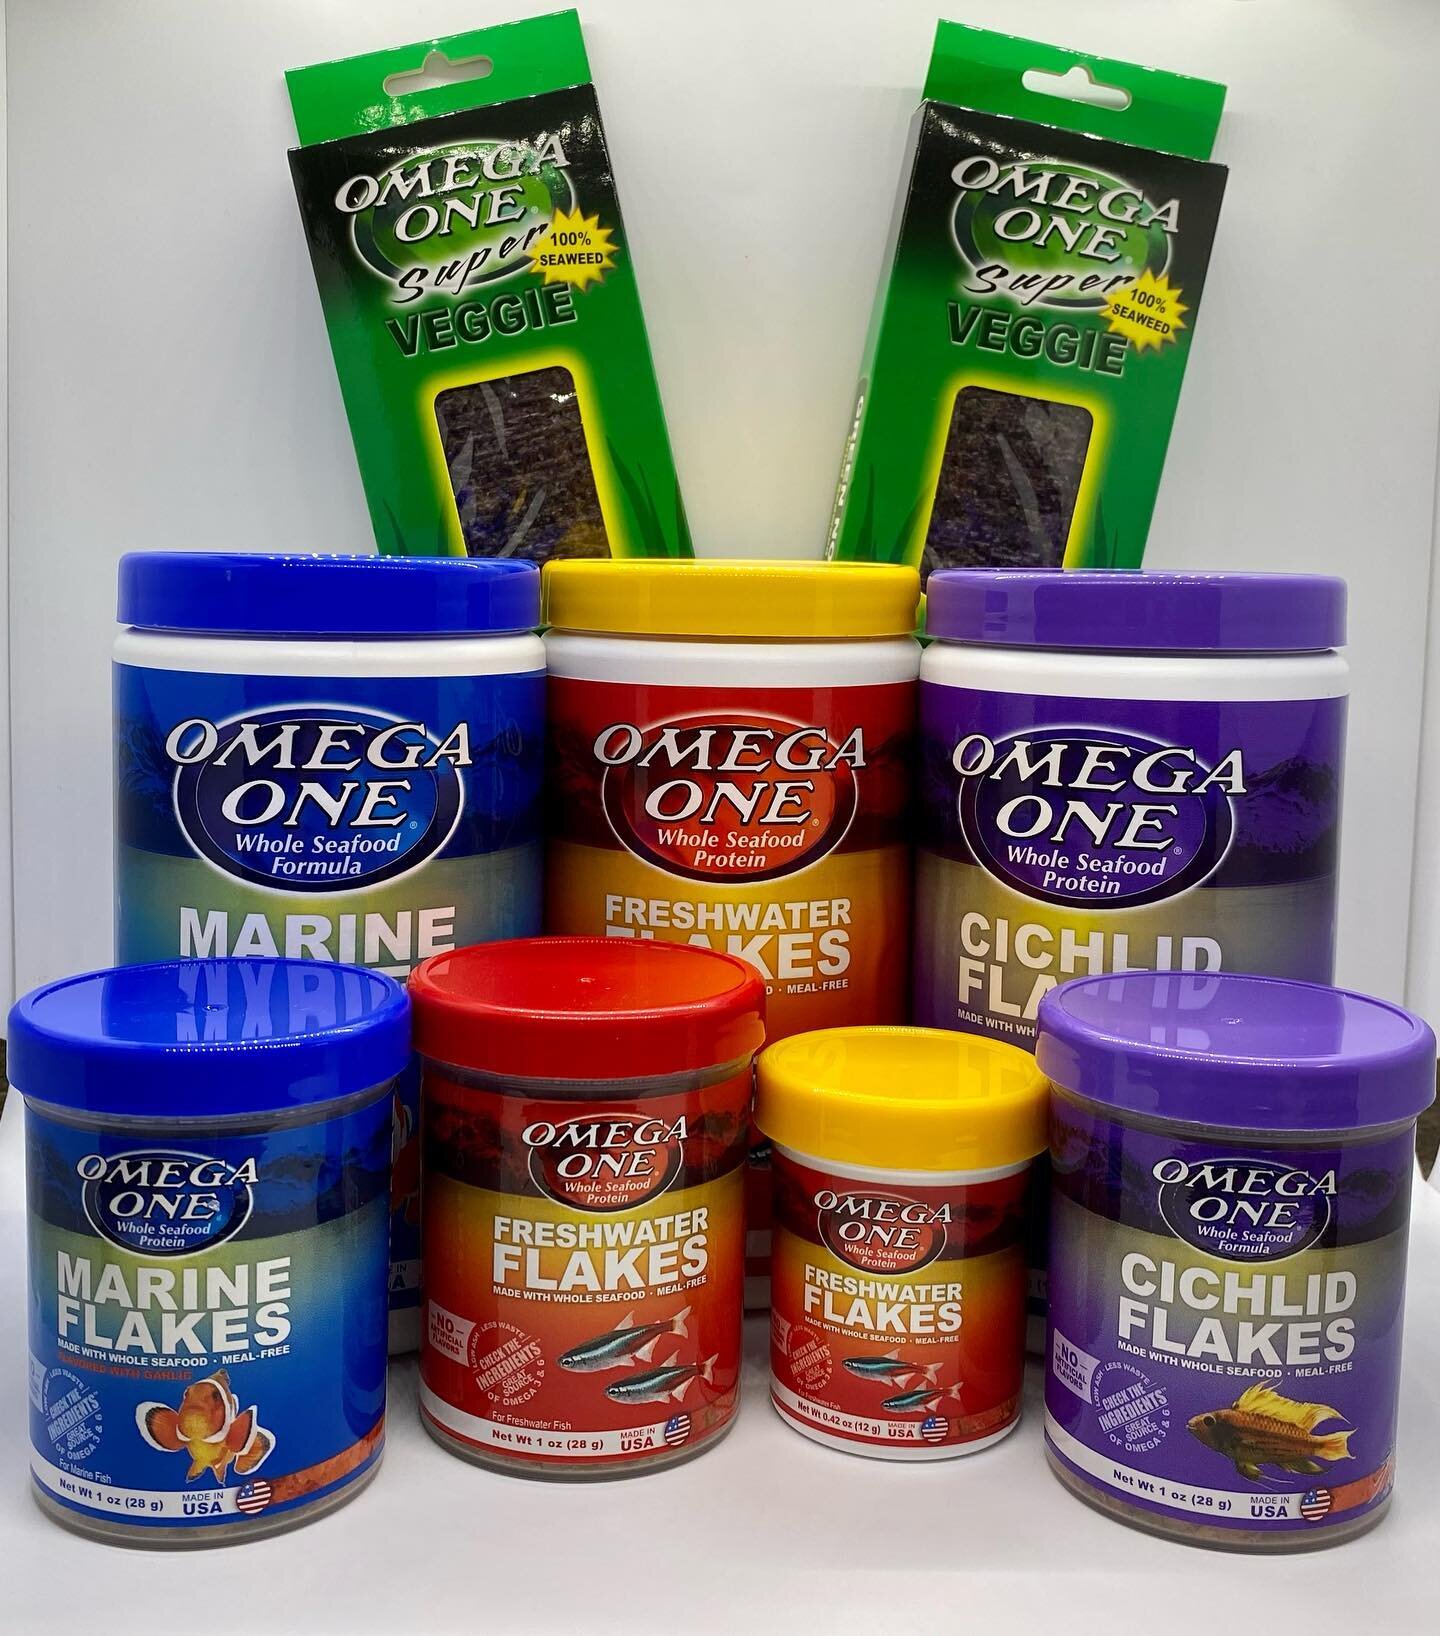 What&rsquo;s your favorite Omega One product? We&rsquo;ve recently picked up some flake, pellet, and tablet foods from them and the fish at the store are loving it. Come by and grab some for your fish today! 
.
.
.
#omegaone #fishfood #healthyforthem